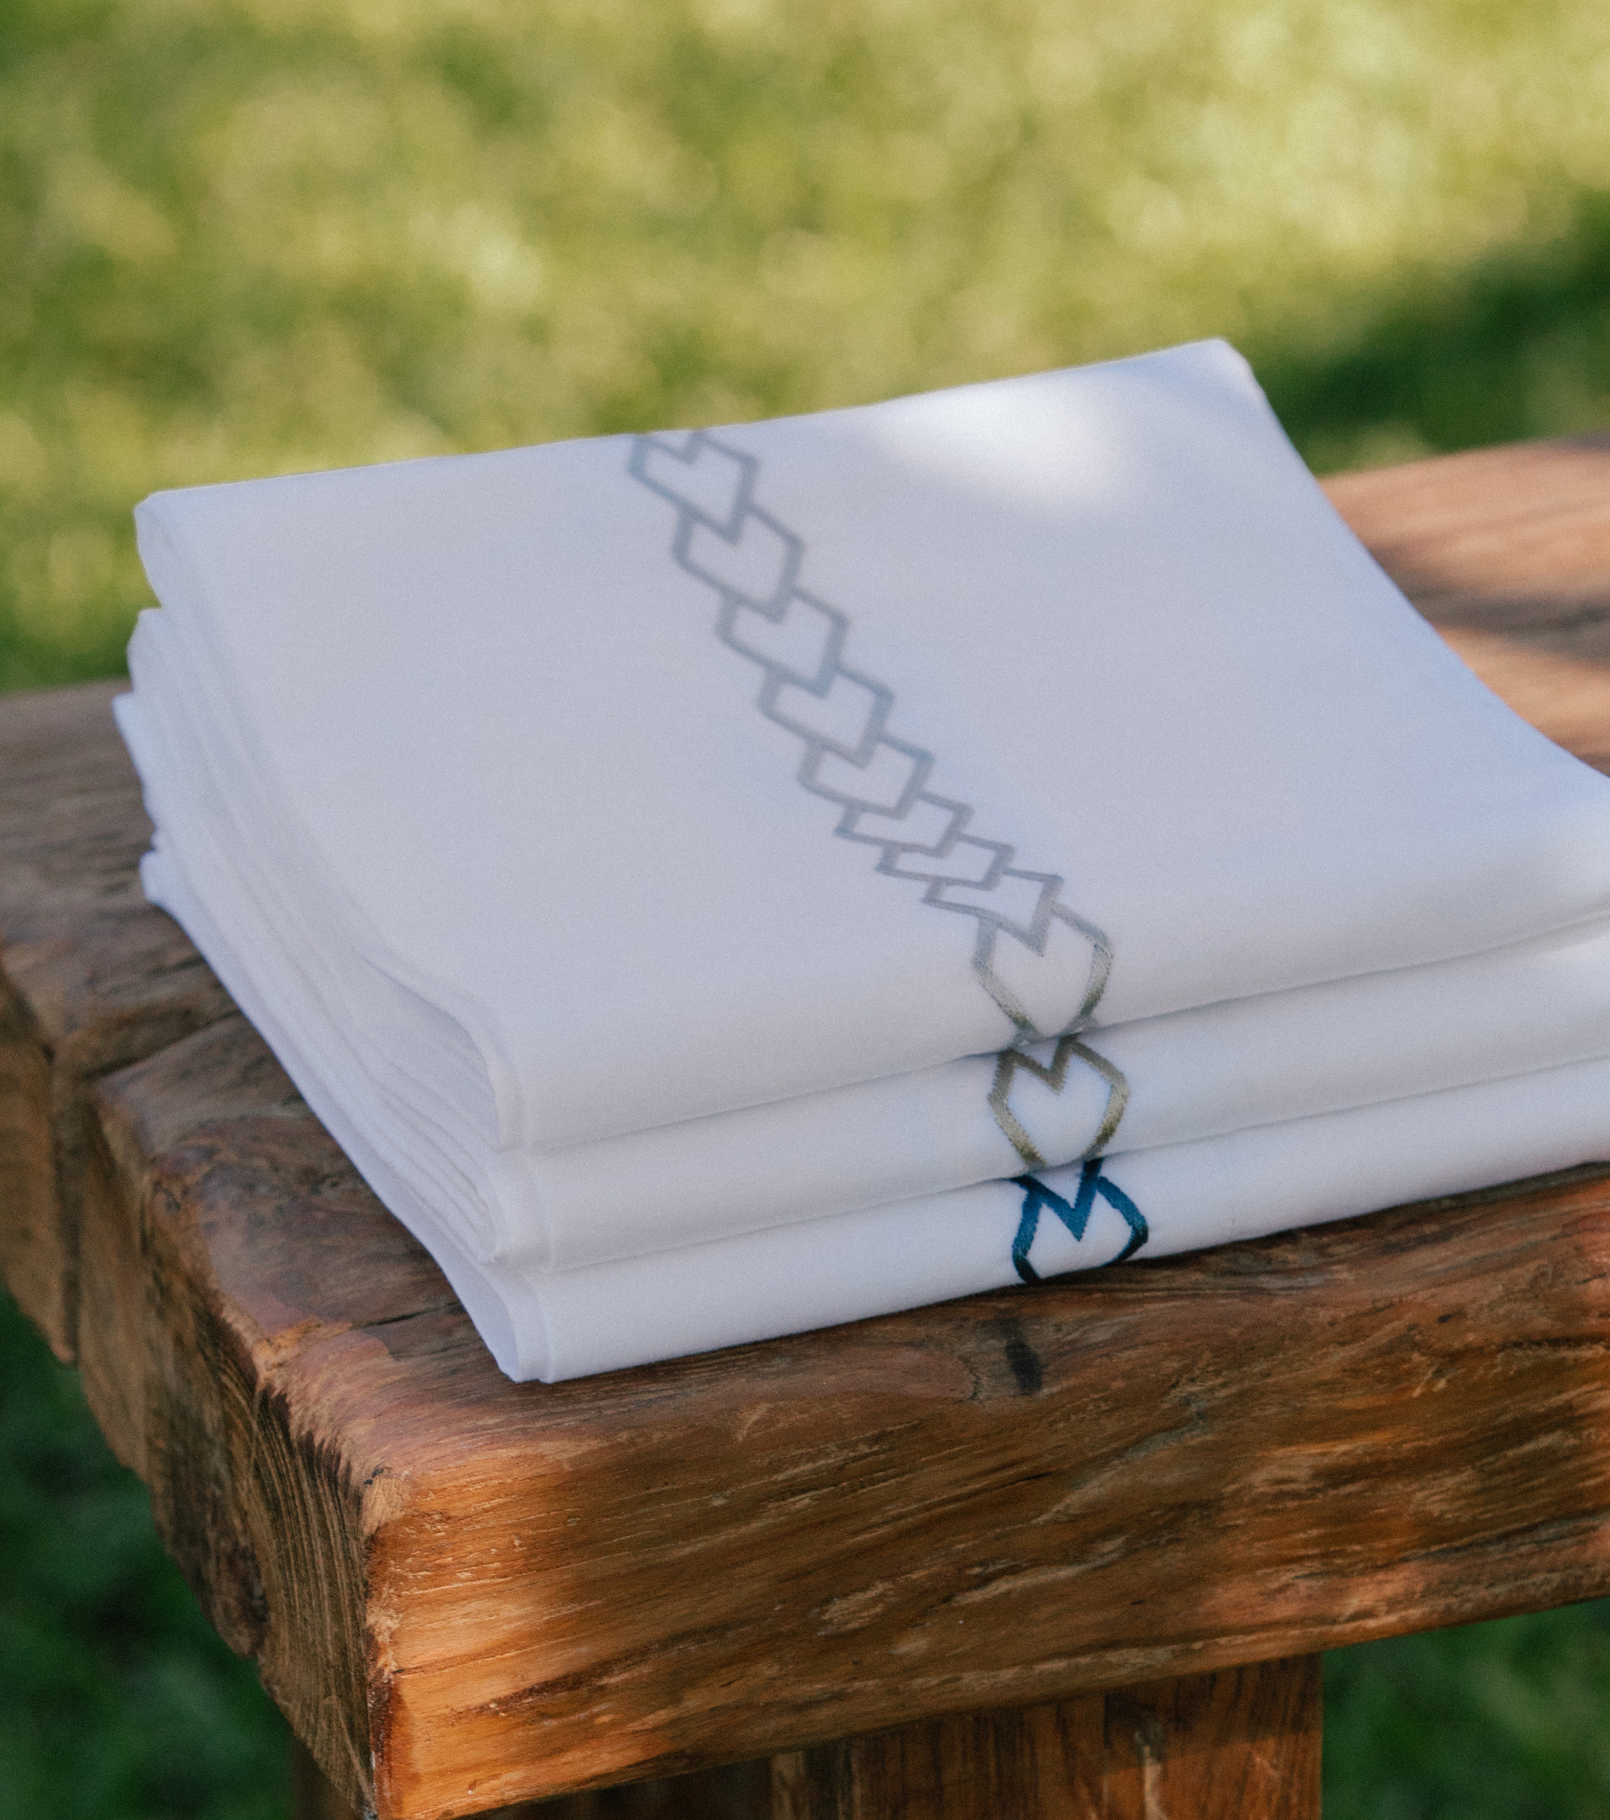 Averylily Waterfall Sheet Sets. 510-thread cotton pure cotton percale.